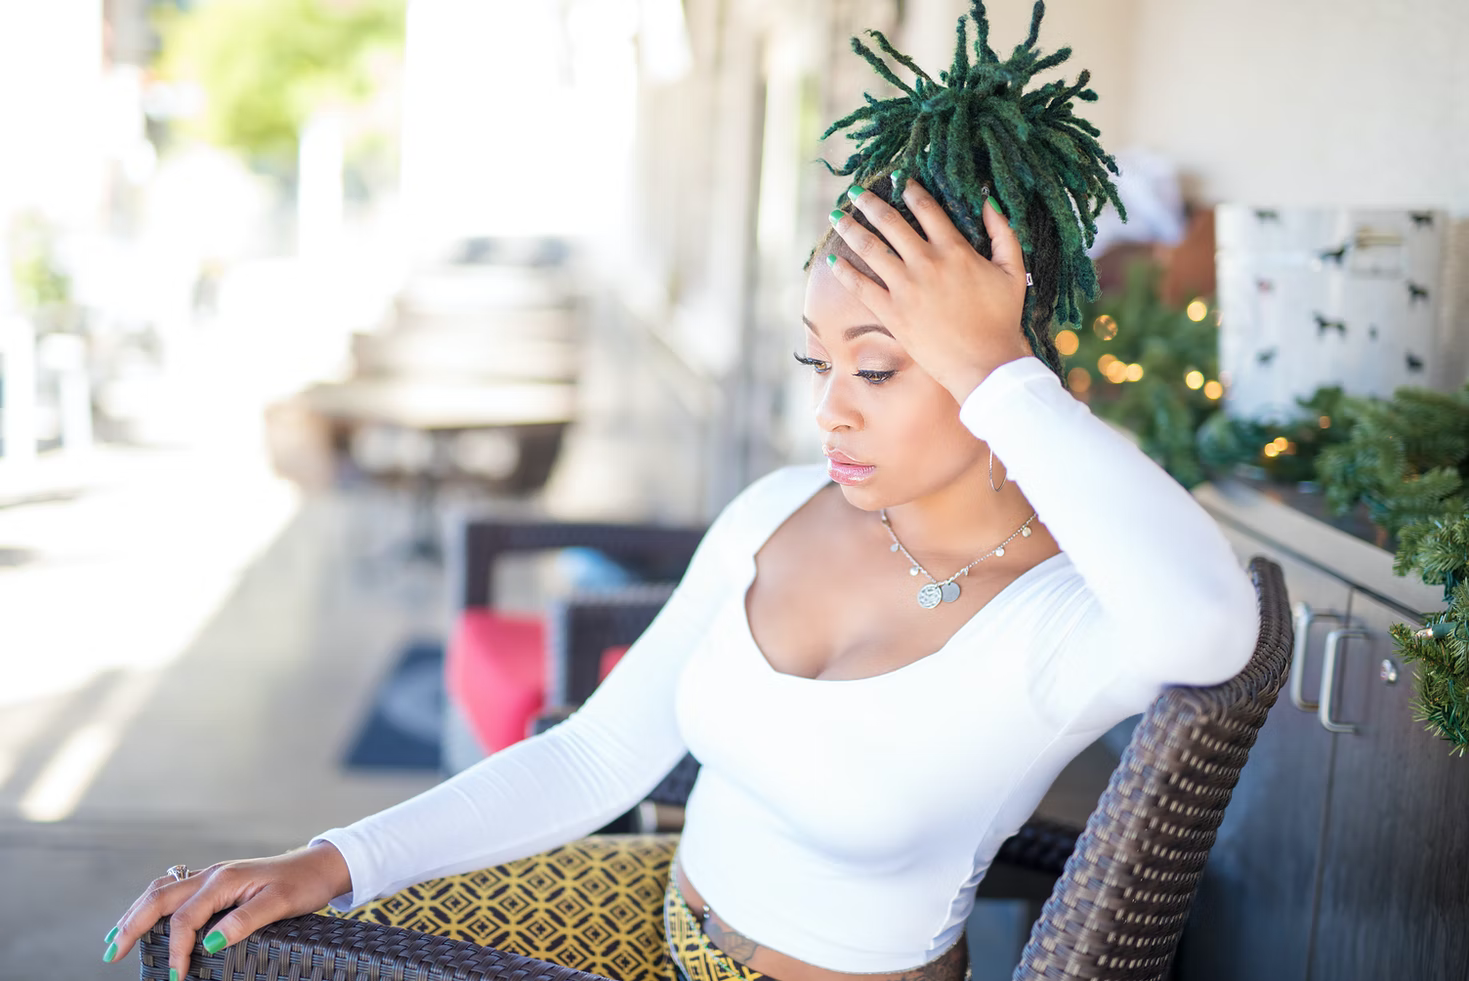  A woman with green dreadlocks sitting on a chair outside.